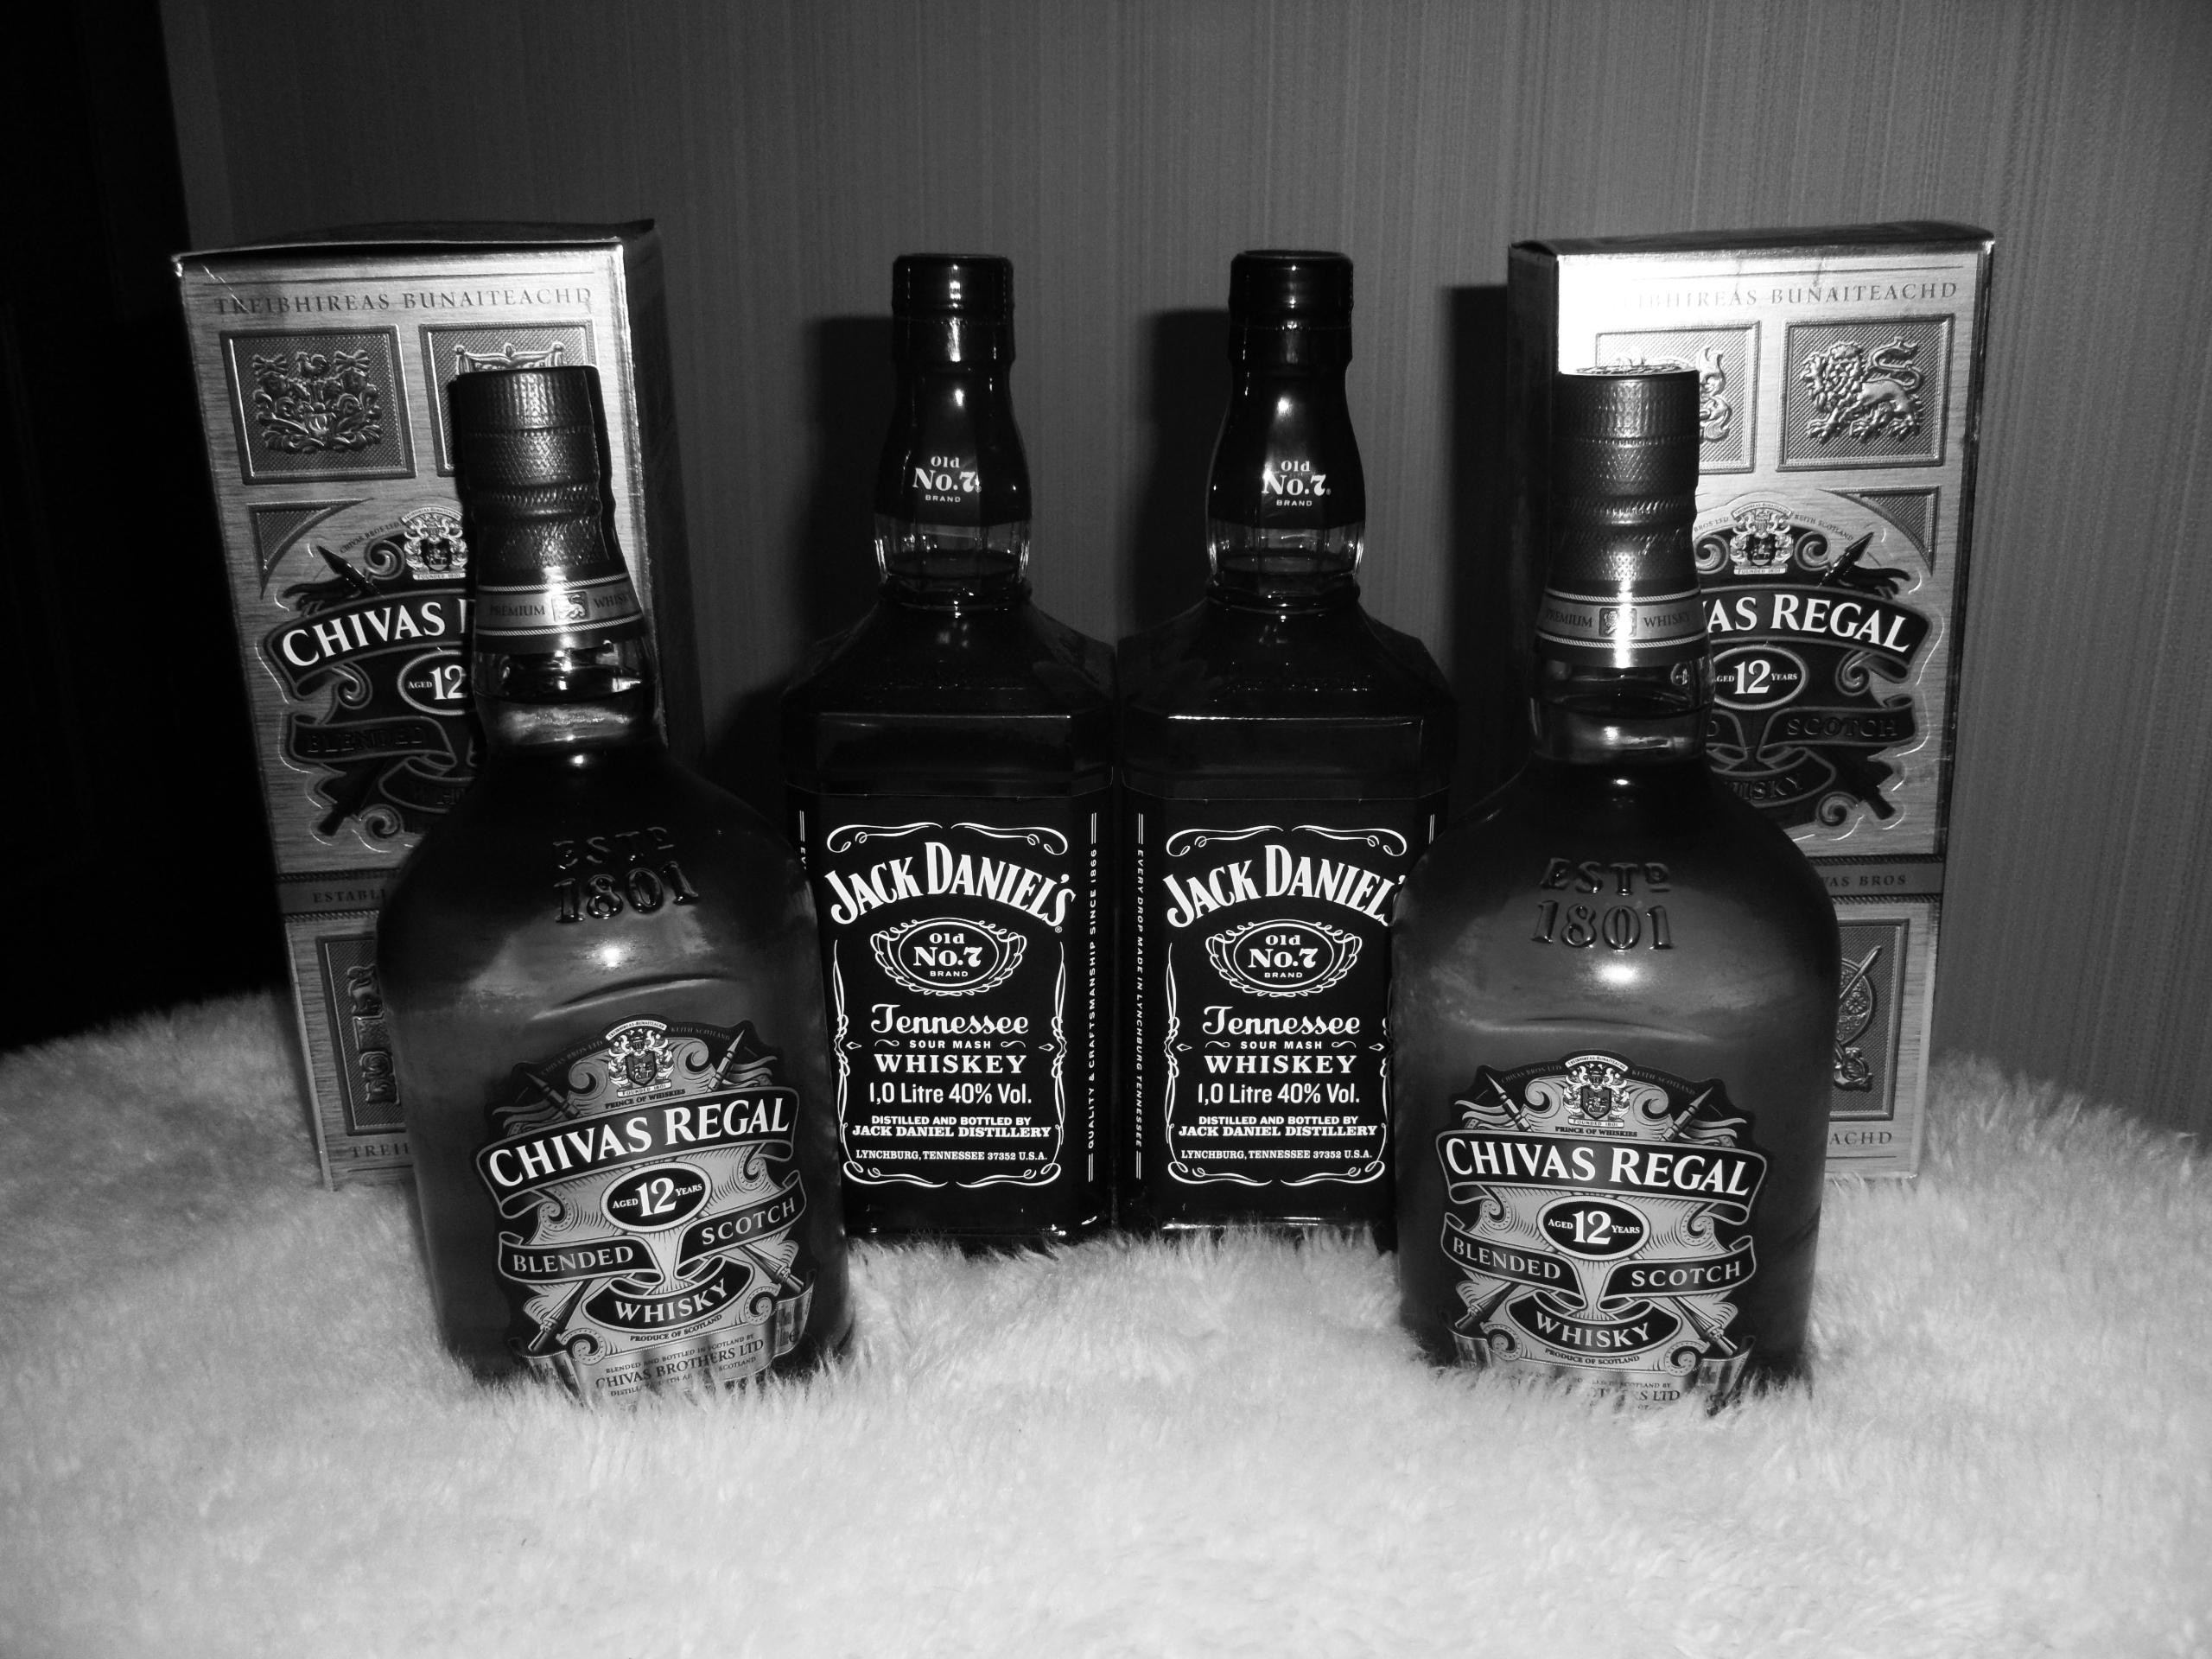 2560x1920 Wallpaper Chivas regal, Jack daniels, 12 years of age, Alcohol, Elite  products, Black white HD, Picture, Image